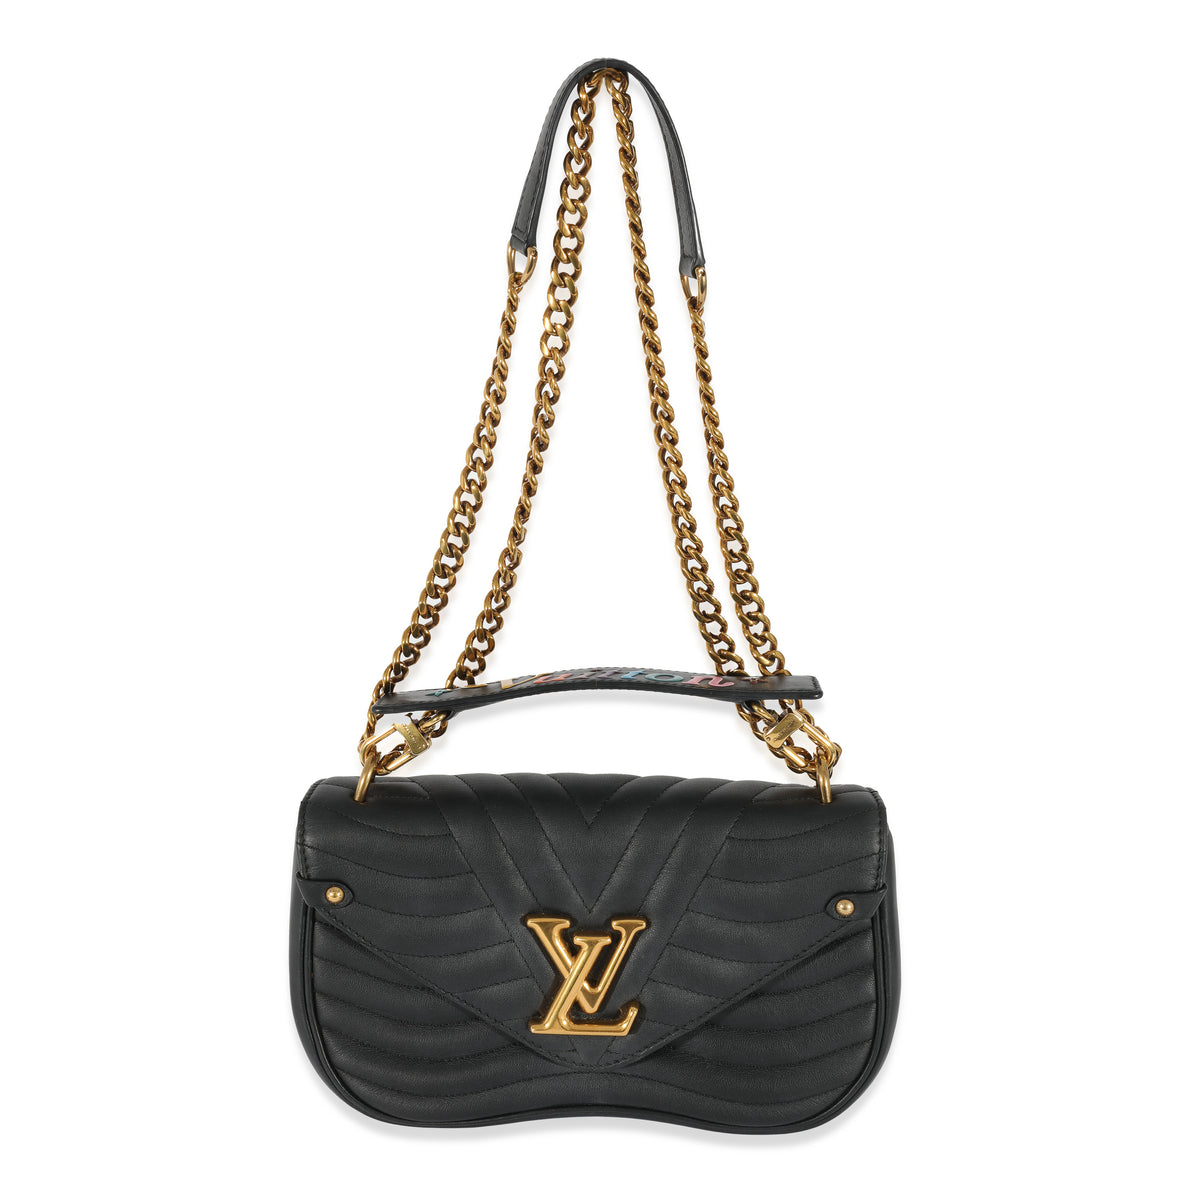 Louis Vuitton Black Leather Small New Wave Camera Bag, myGemma, IT